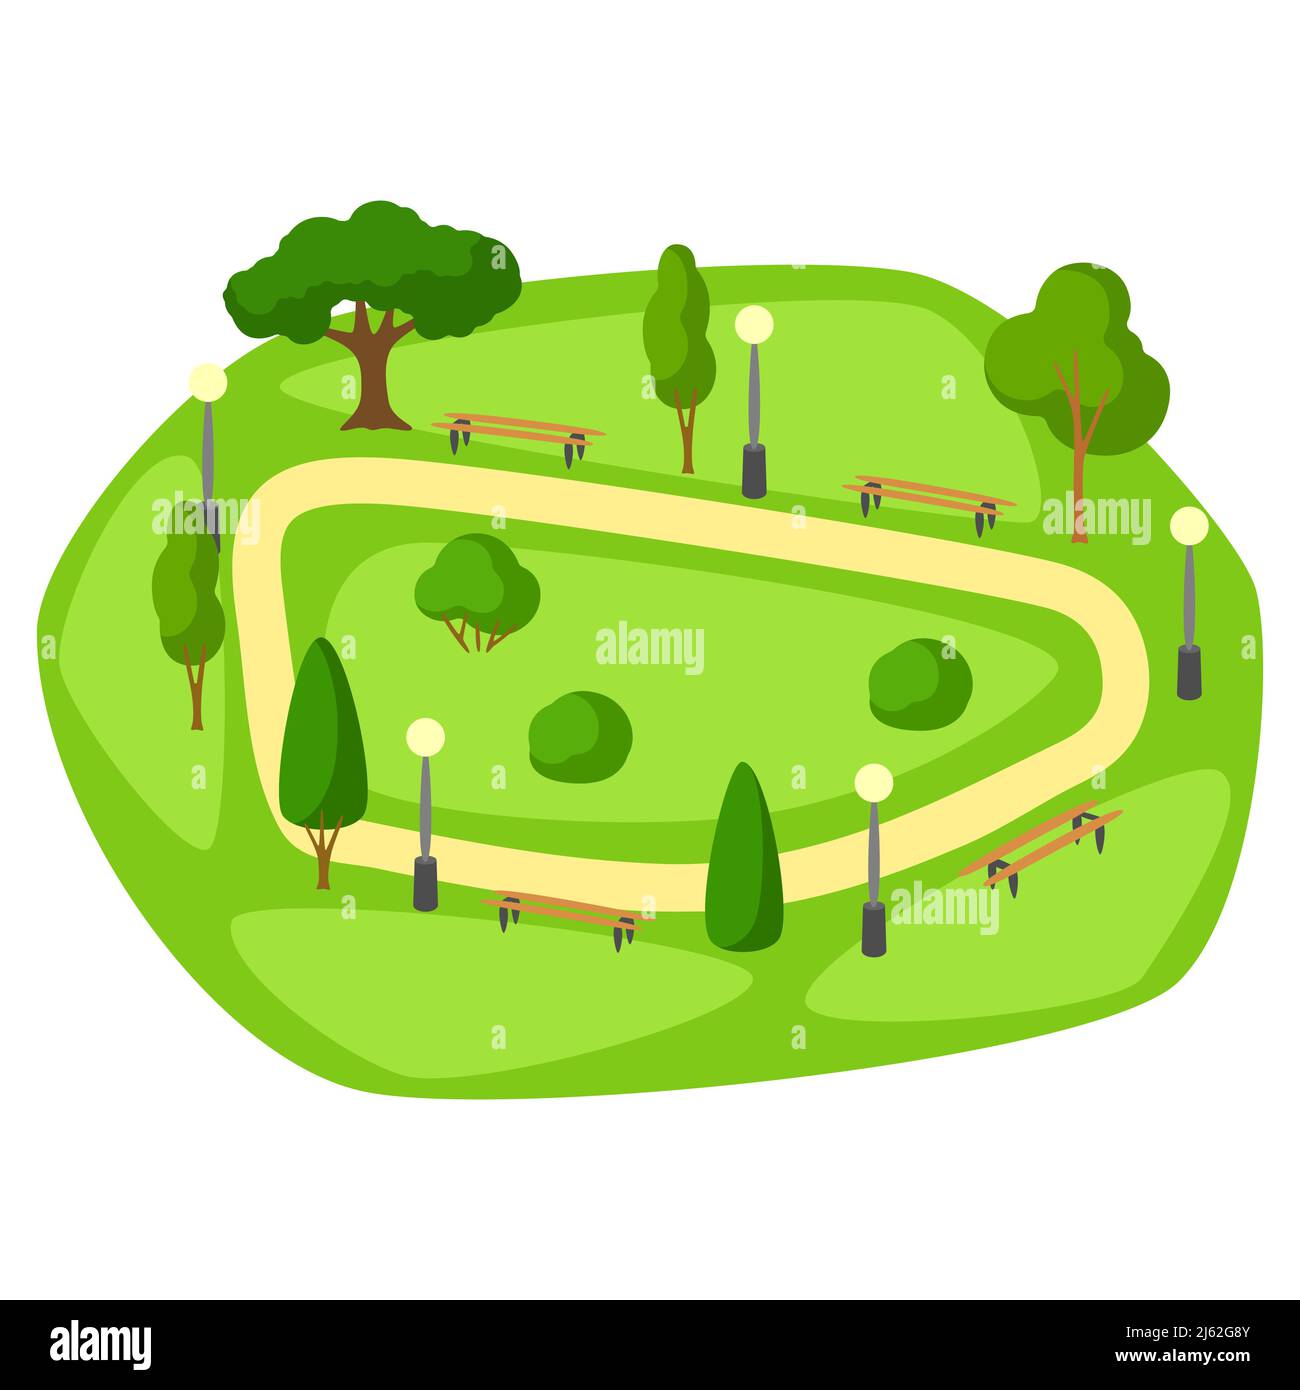 Illustration of beautiful summer or spring city park. Urban public space with lawn and trees for walking and relaxing. Stock Vector